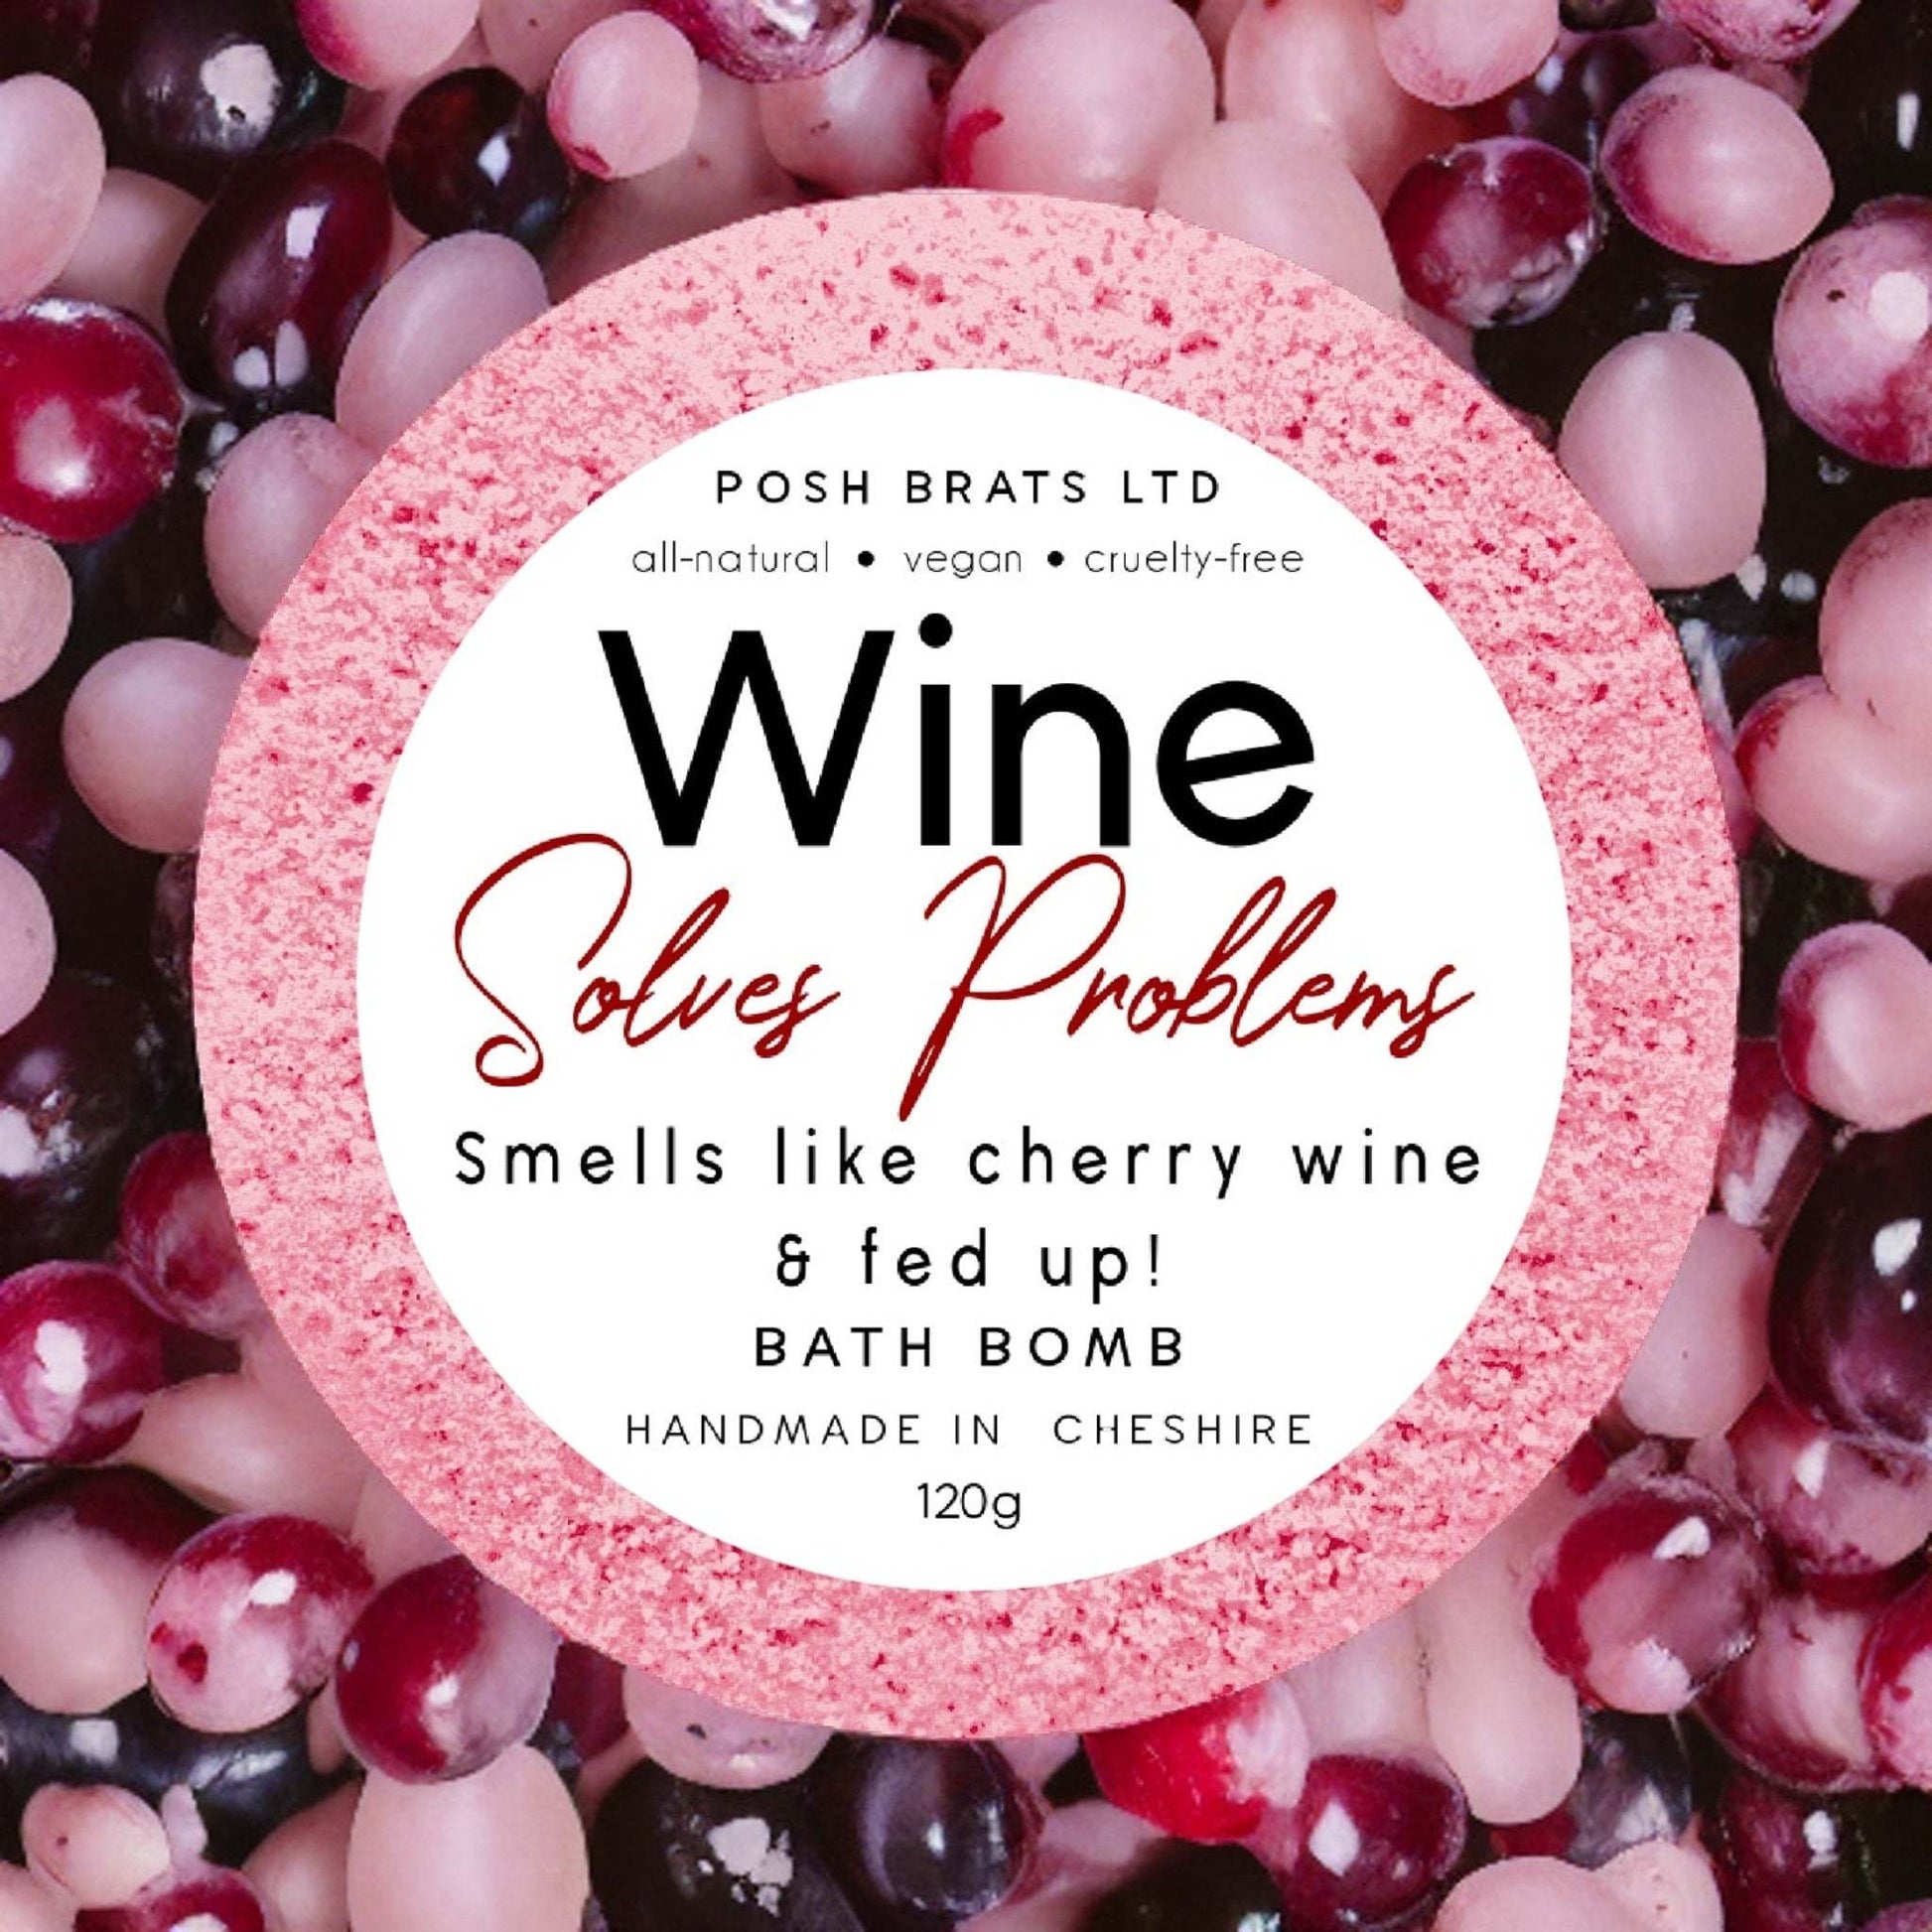 Unwind in style with our Wine Solves Problems Fizzy Bath Bomb. Just like a fine wine, it's designed to soothe your senses.